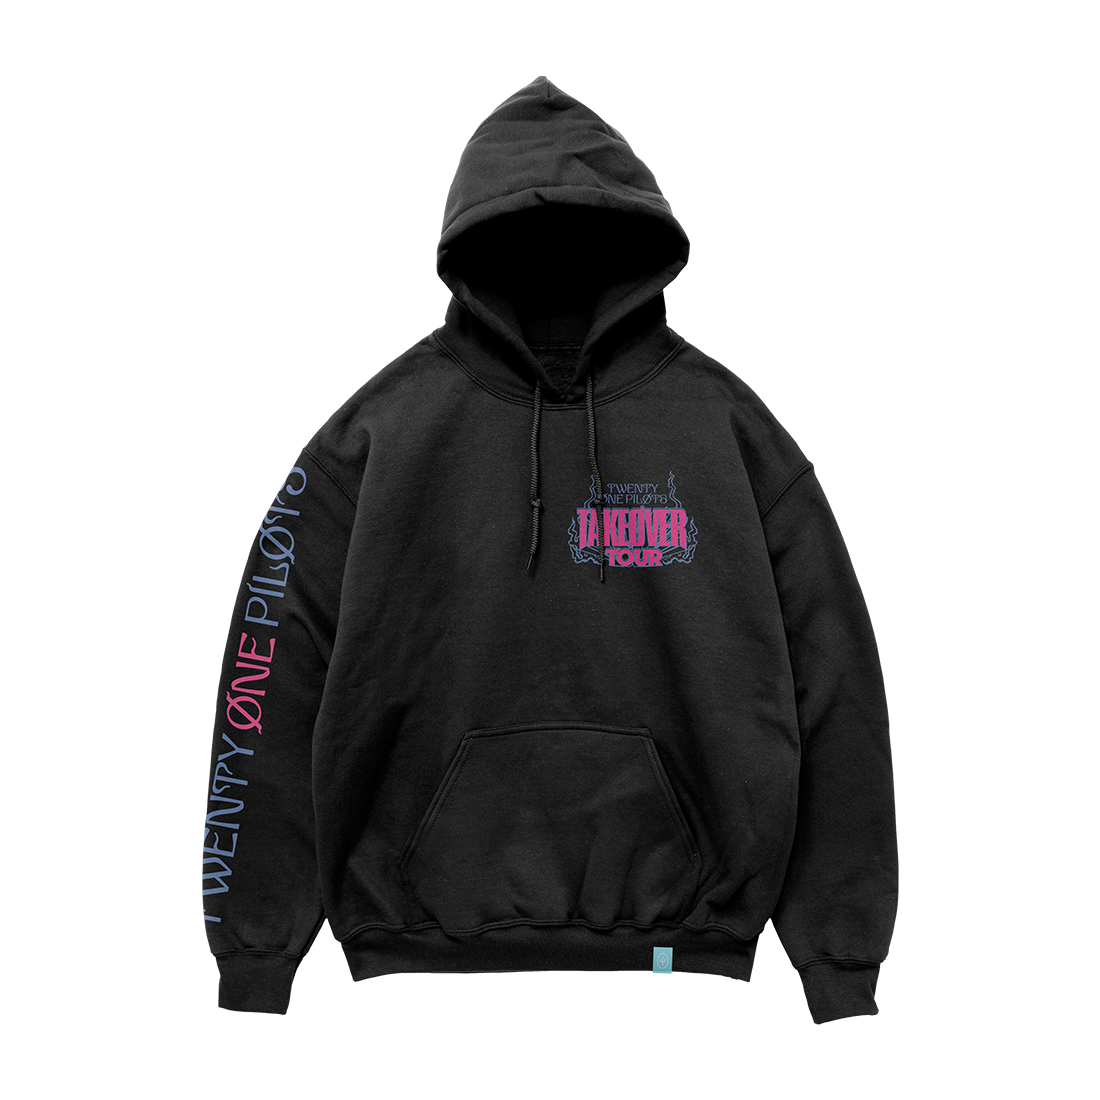 Takeover Tour Hoodie